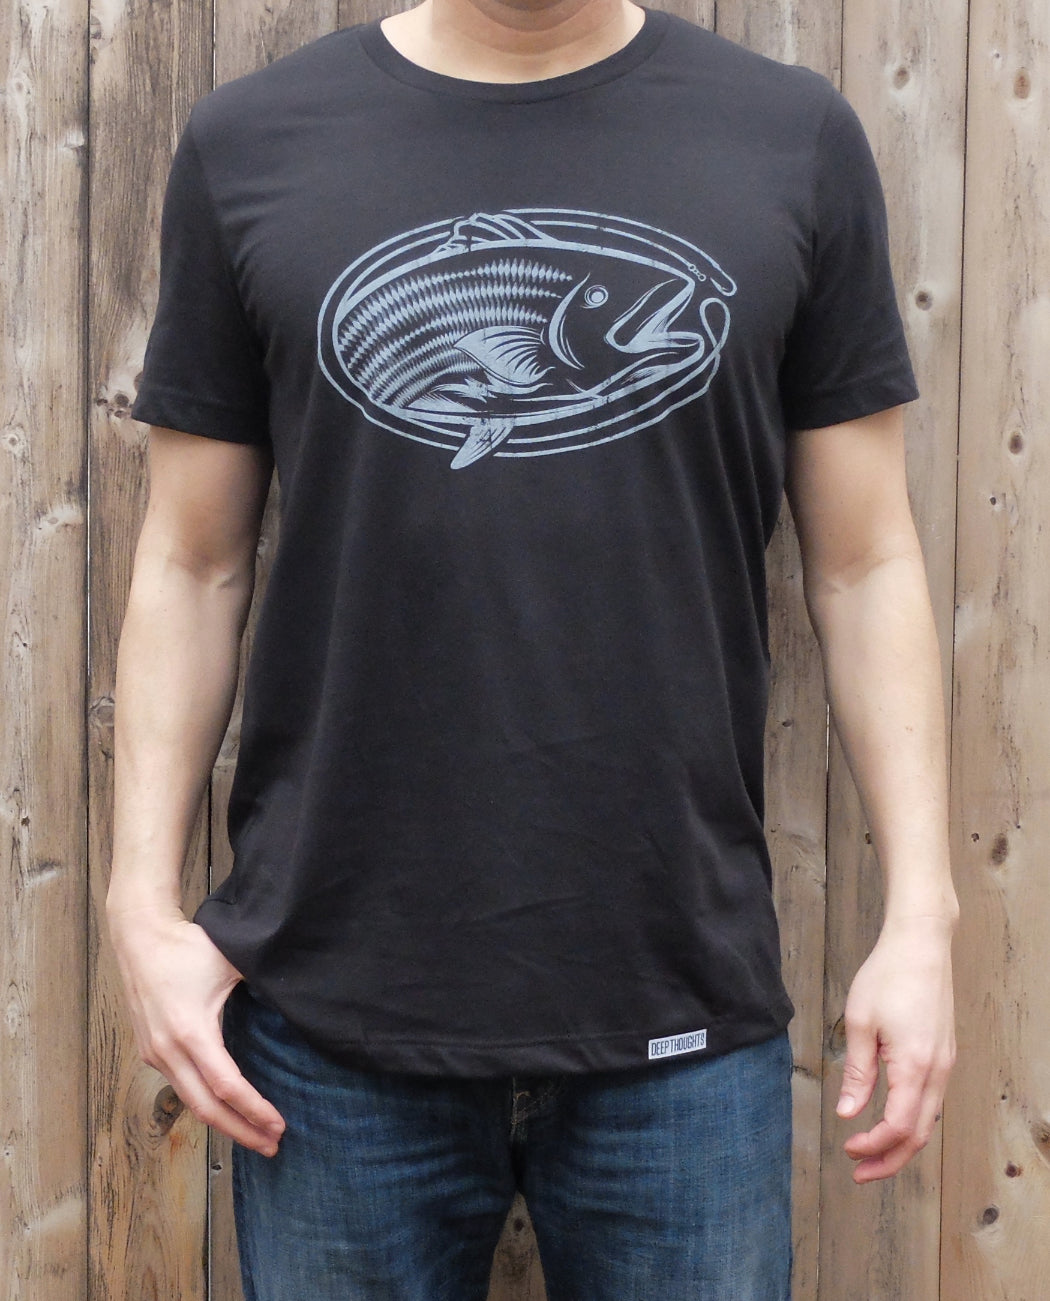 man wearing vintage black cotton t-shirt with white oval-shaped striped bass graphic